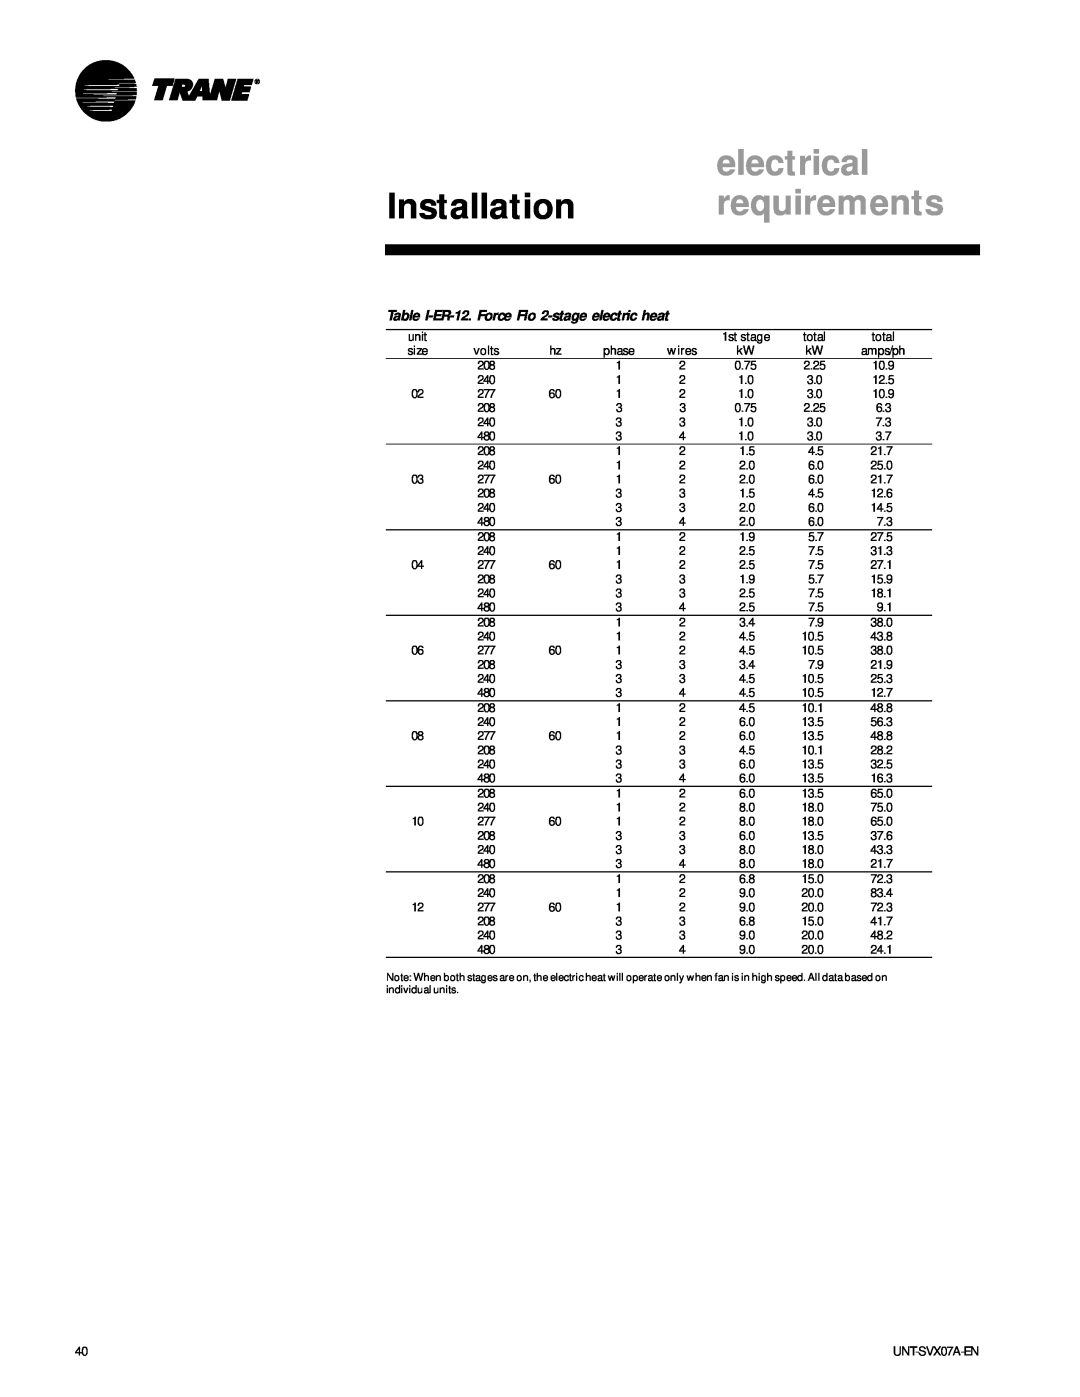 Trane UNT-SVX07A-EN manual electrical, Installation requirements, Table I-ER-12. Force Flo 2-stage electric heat 